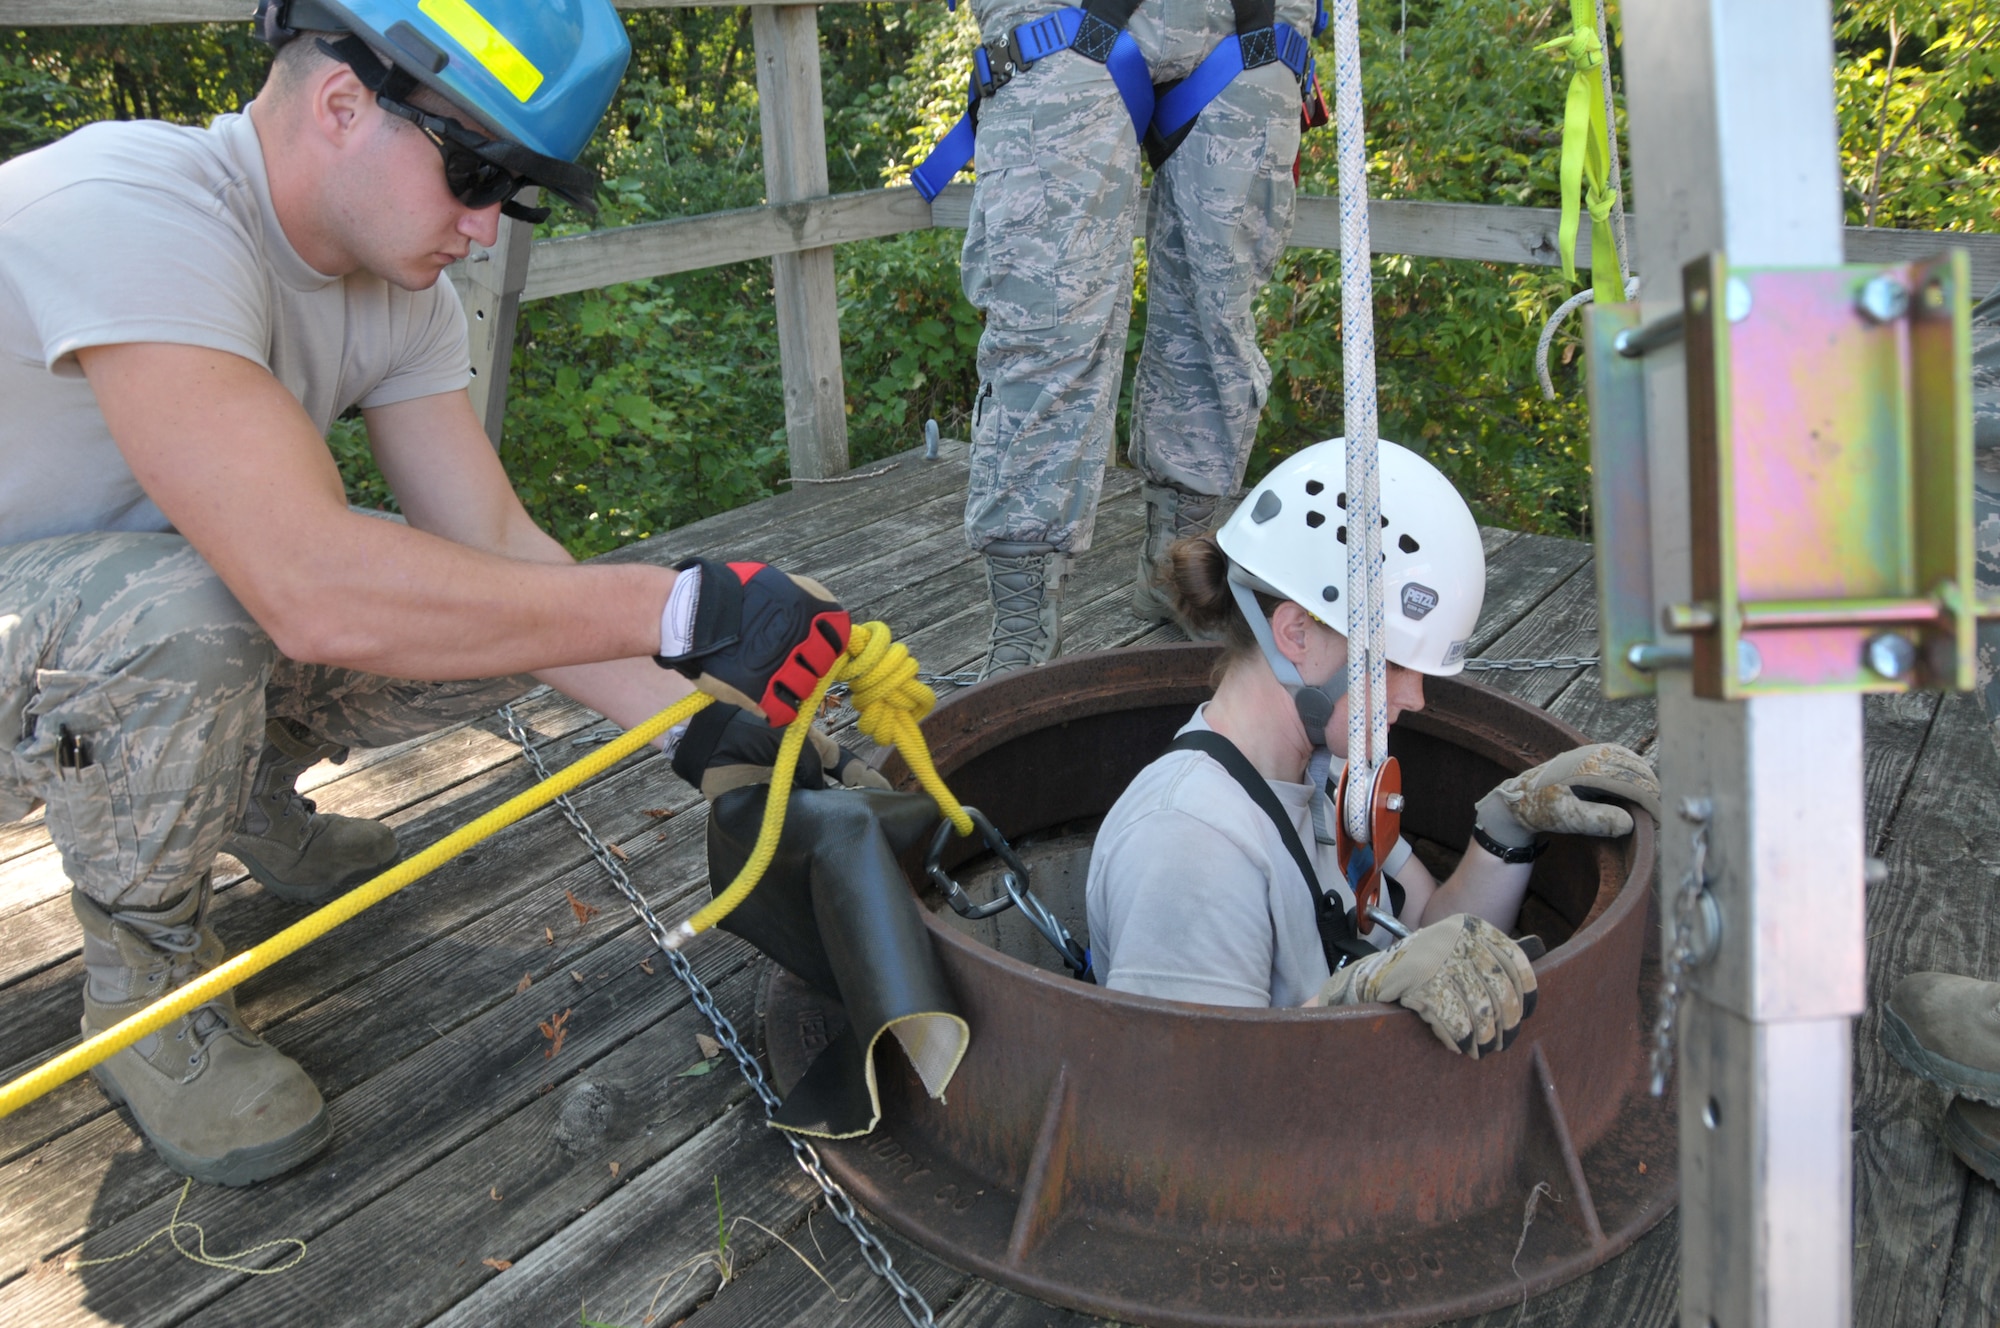 Senior Airman James Olson helps lower Staff Sgt. Jennifer Bristol during confined space training for the 109th Fire Department's search and rescue team at Stratton Air National Guard Base, New York, on Sept. 17, 2015. The 12-person search and rescue team trains monthly on various rescue techniques. (U.S. Air National Guard photo by Tech. Sgt. Catharine Schmidt/Released)